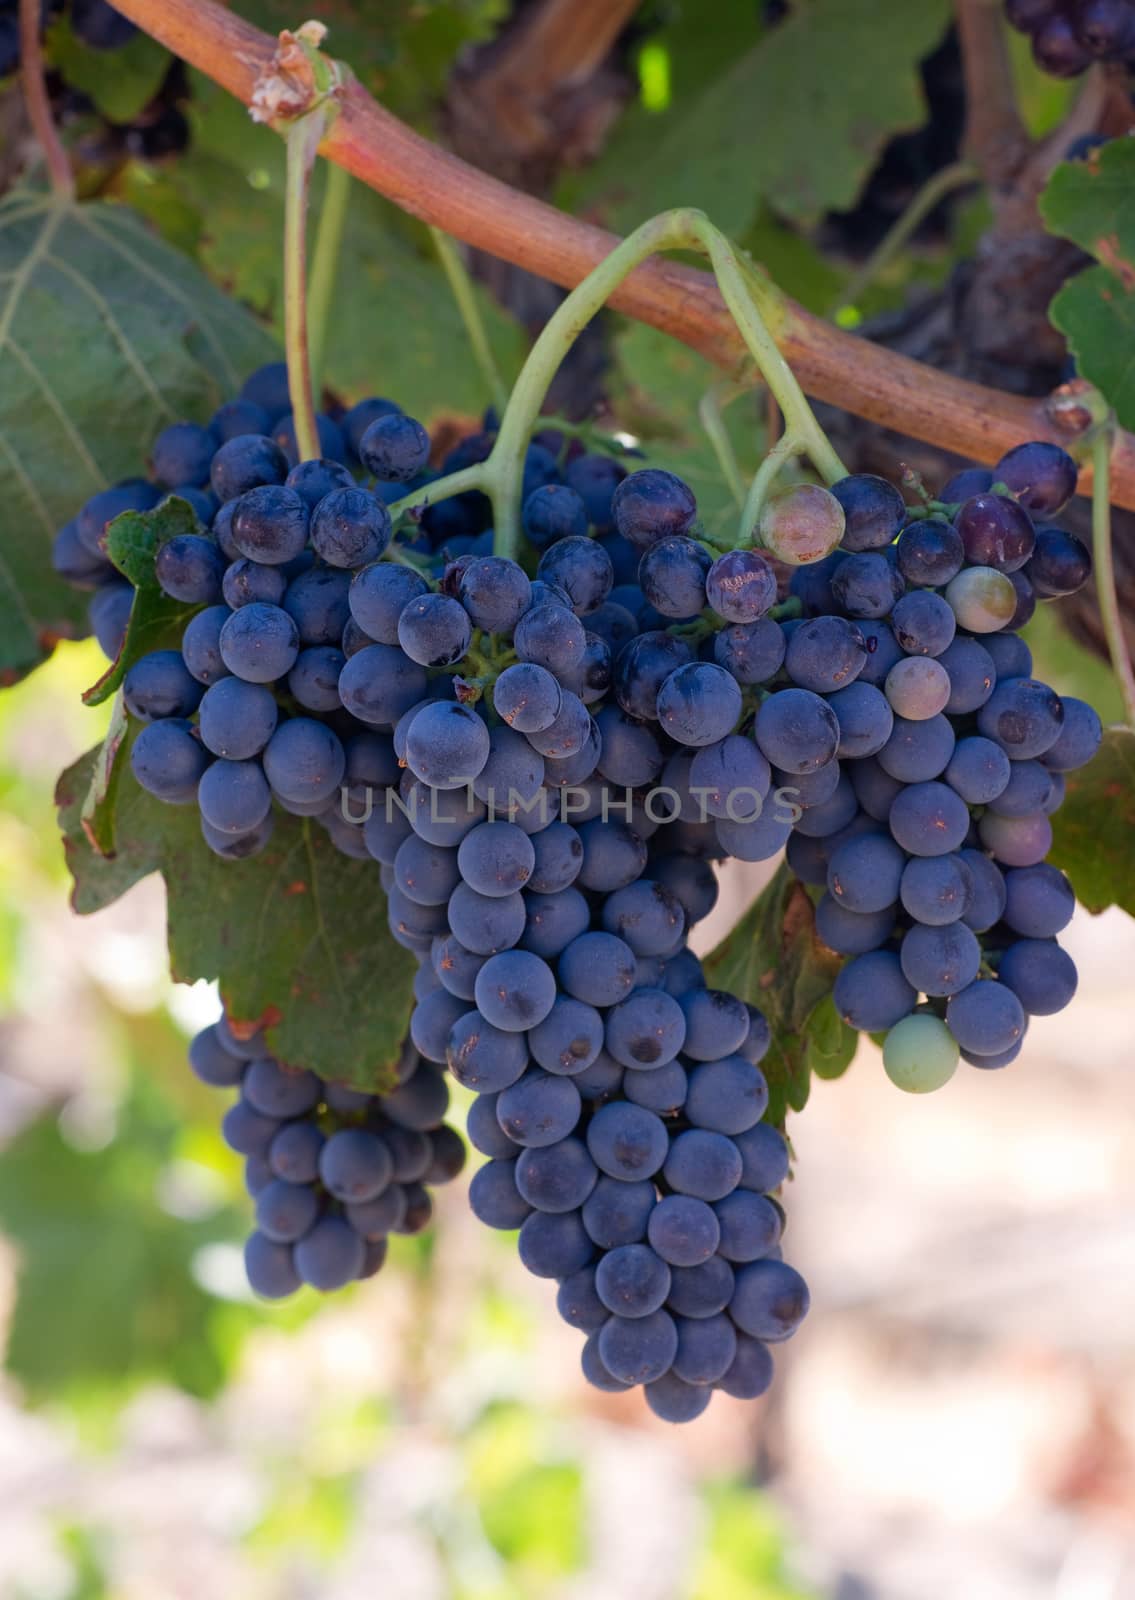 Amazing succulent Grapes on the Vine just before harvest